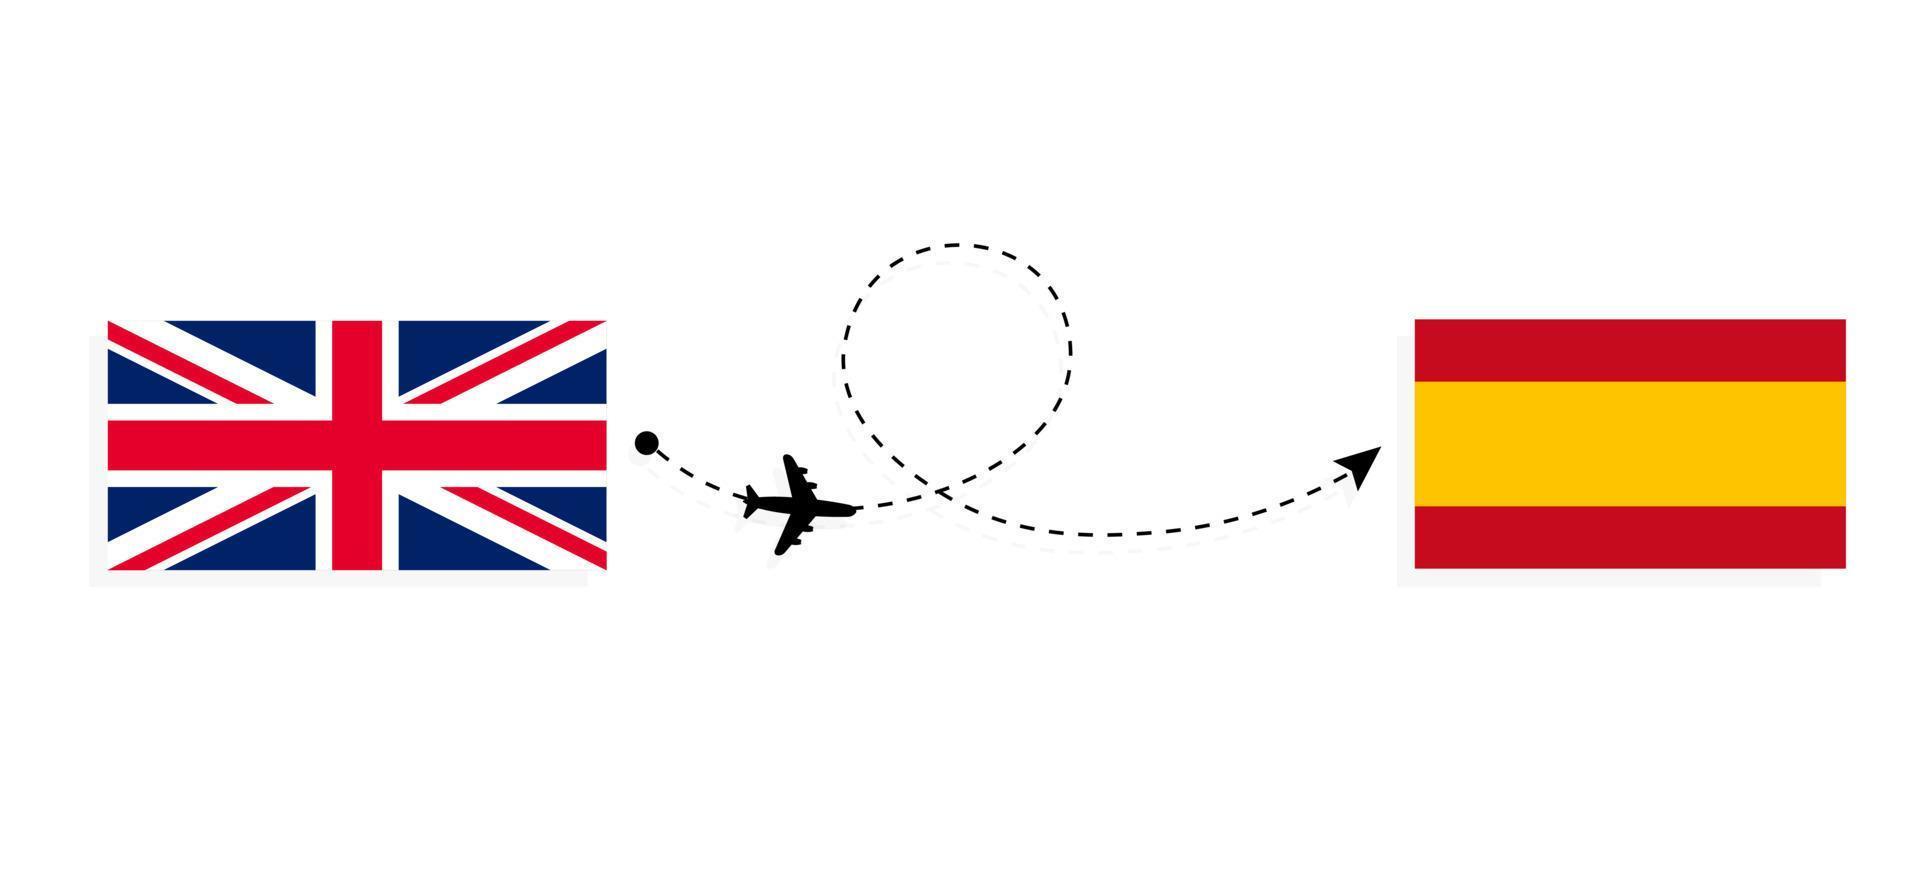 Flight and travel from United Kingdom of Great Britain to Spain by passenger airplane Travel concept vector